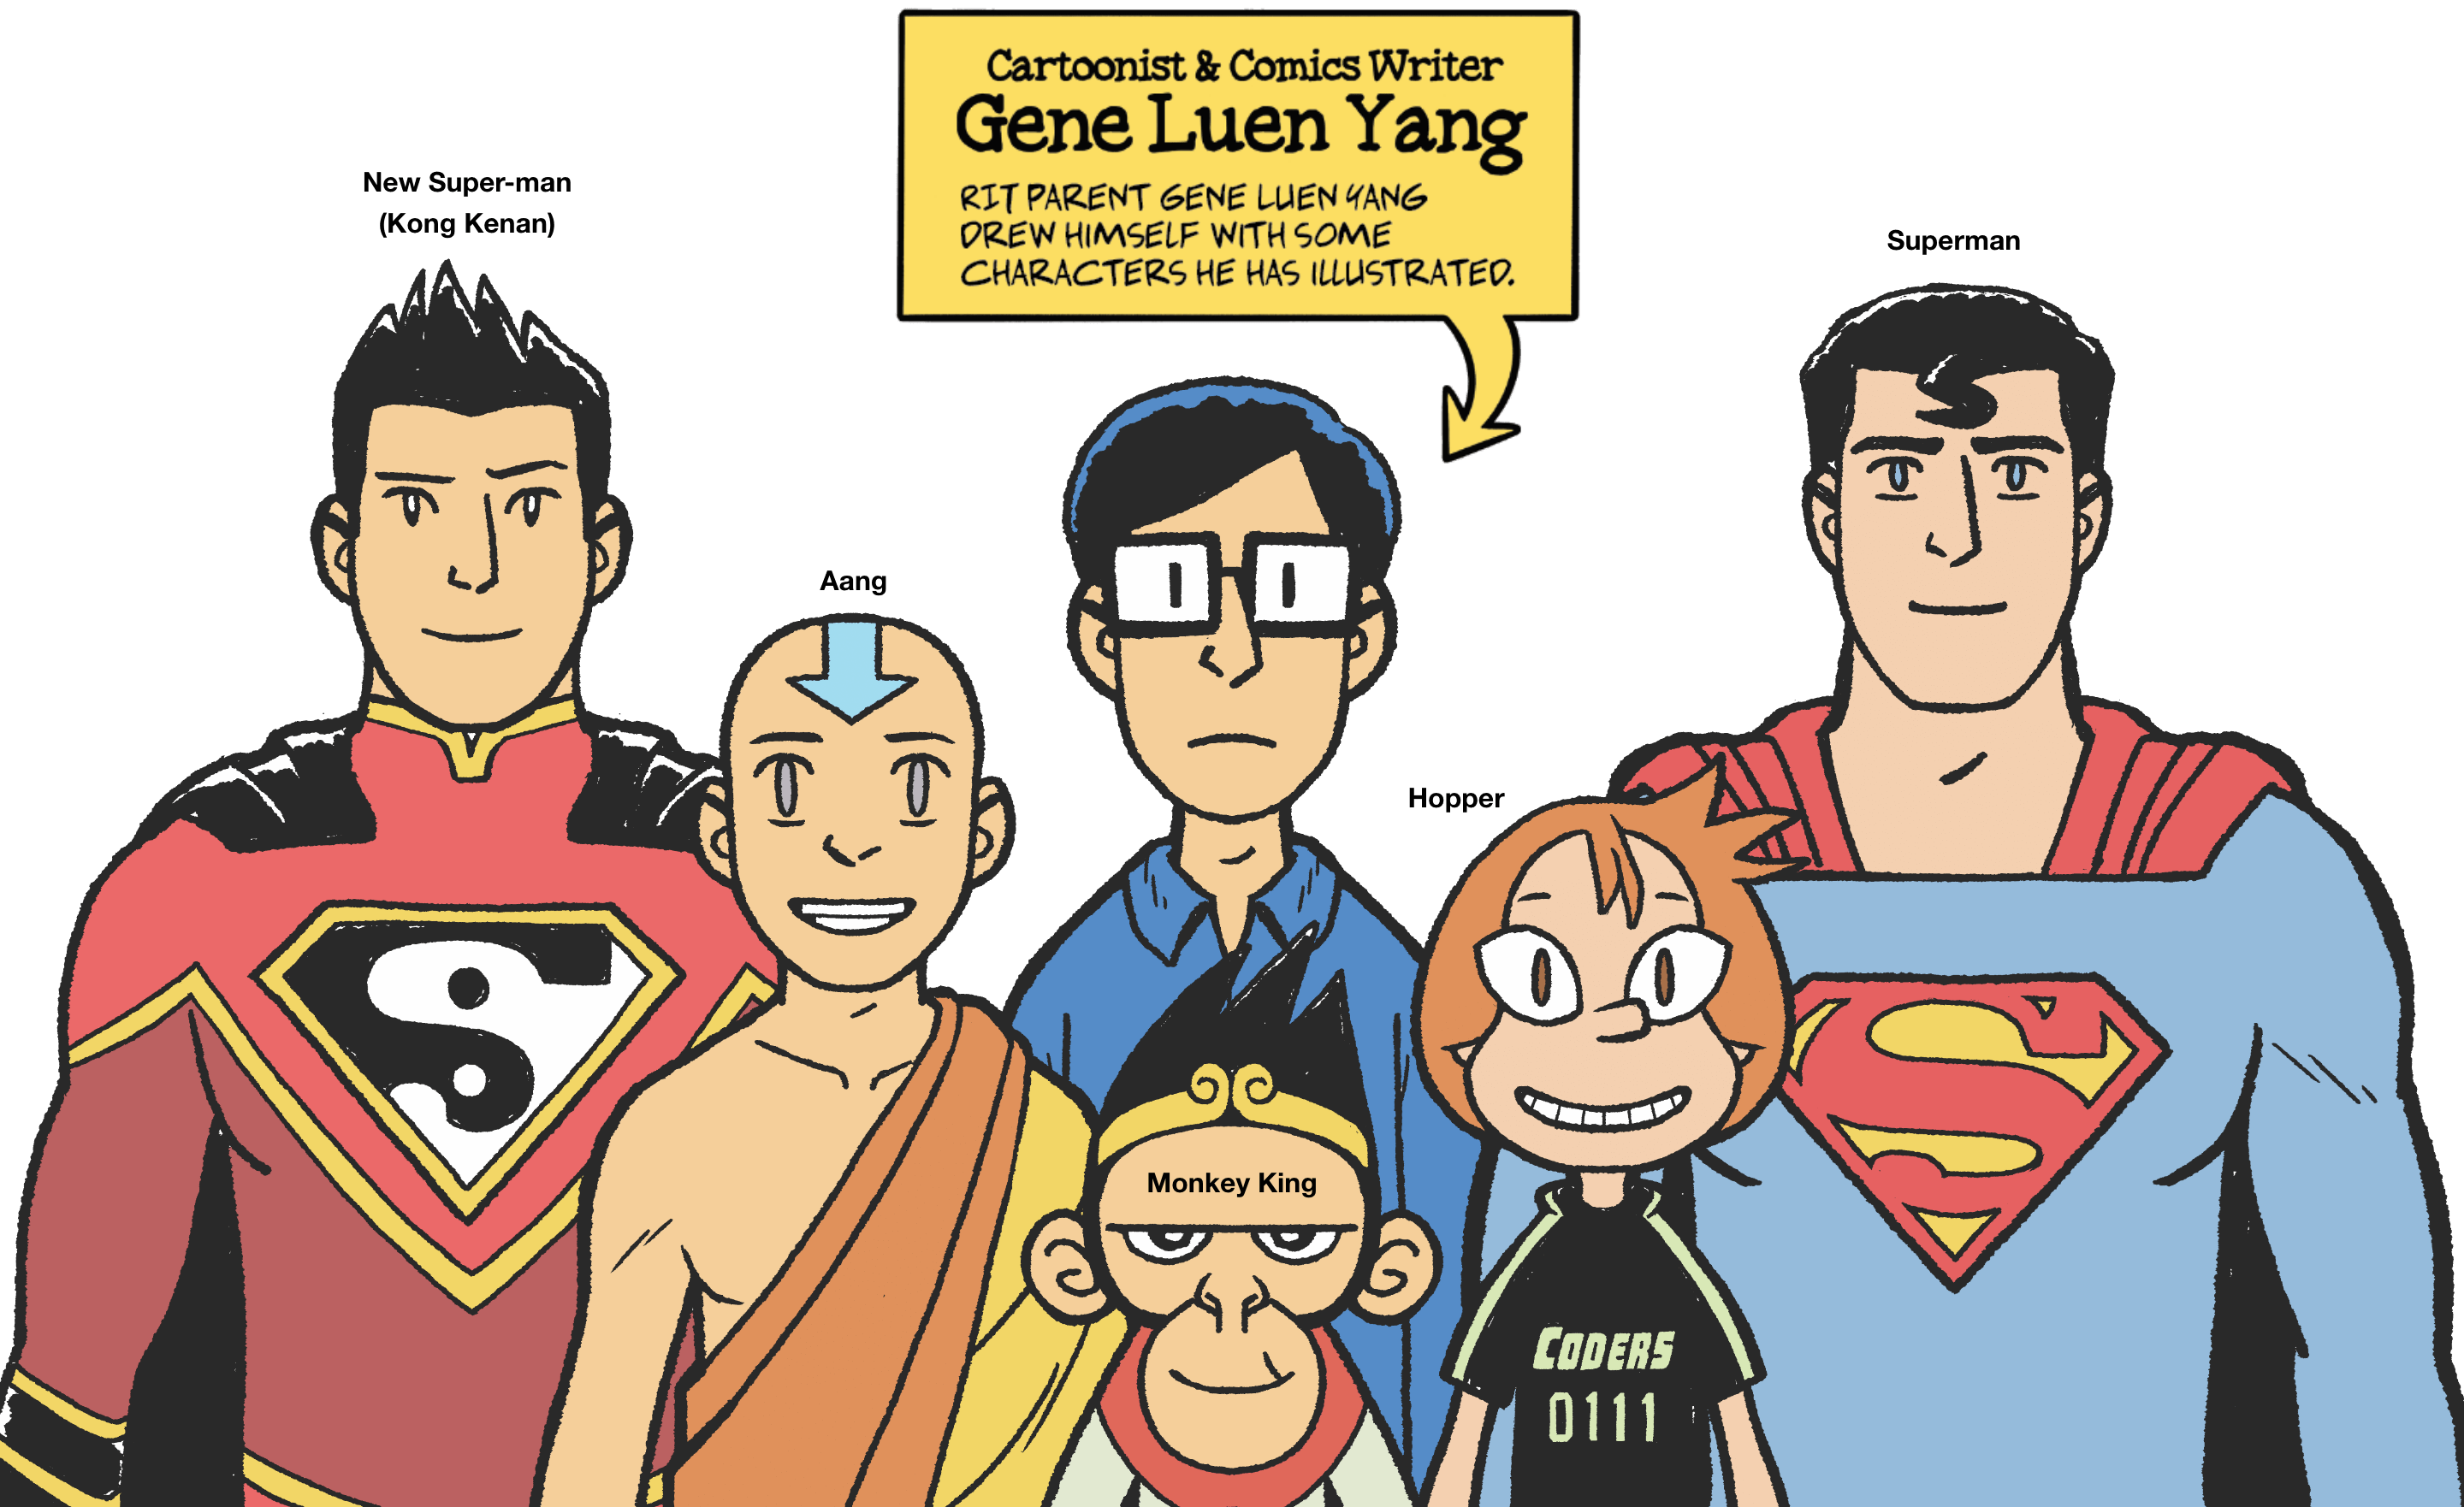 six characters drawn by cartoonist and comics writer Gene Luen Yang with a cartoon text bubble. Text says R I T parent Gene Luen Yang drew himself with some characters he has illustrated. Characters include traditional Superman, Asian-inspired Superman, man with glasses, man wearing a Buddhist monk wrap, a monkey, and a person wearing a coders T-shirt.